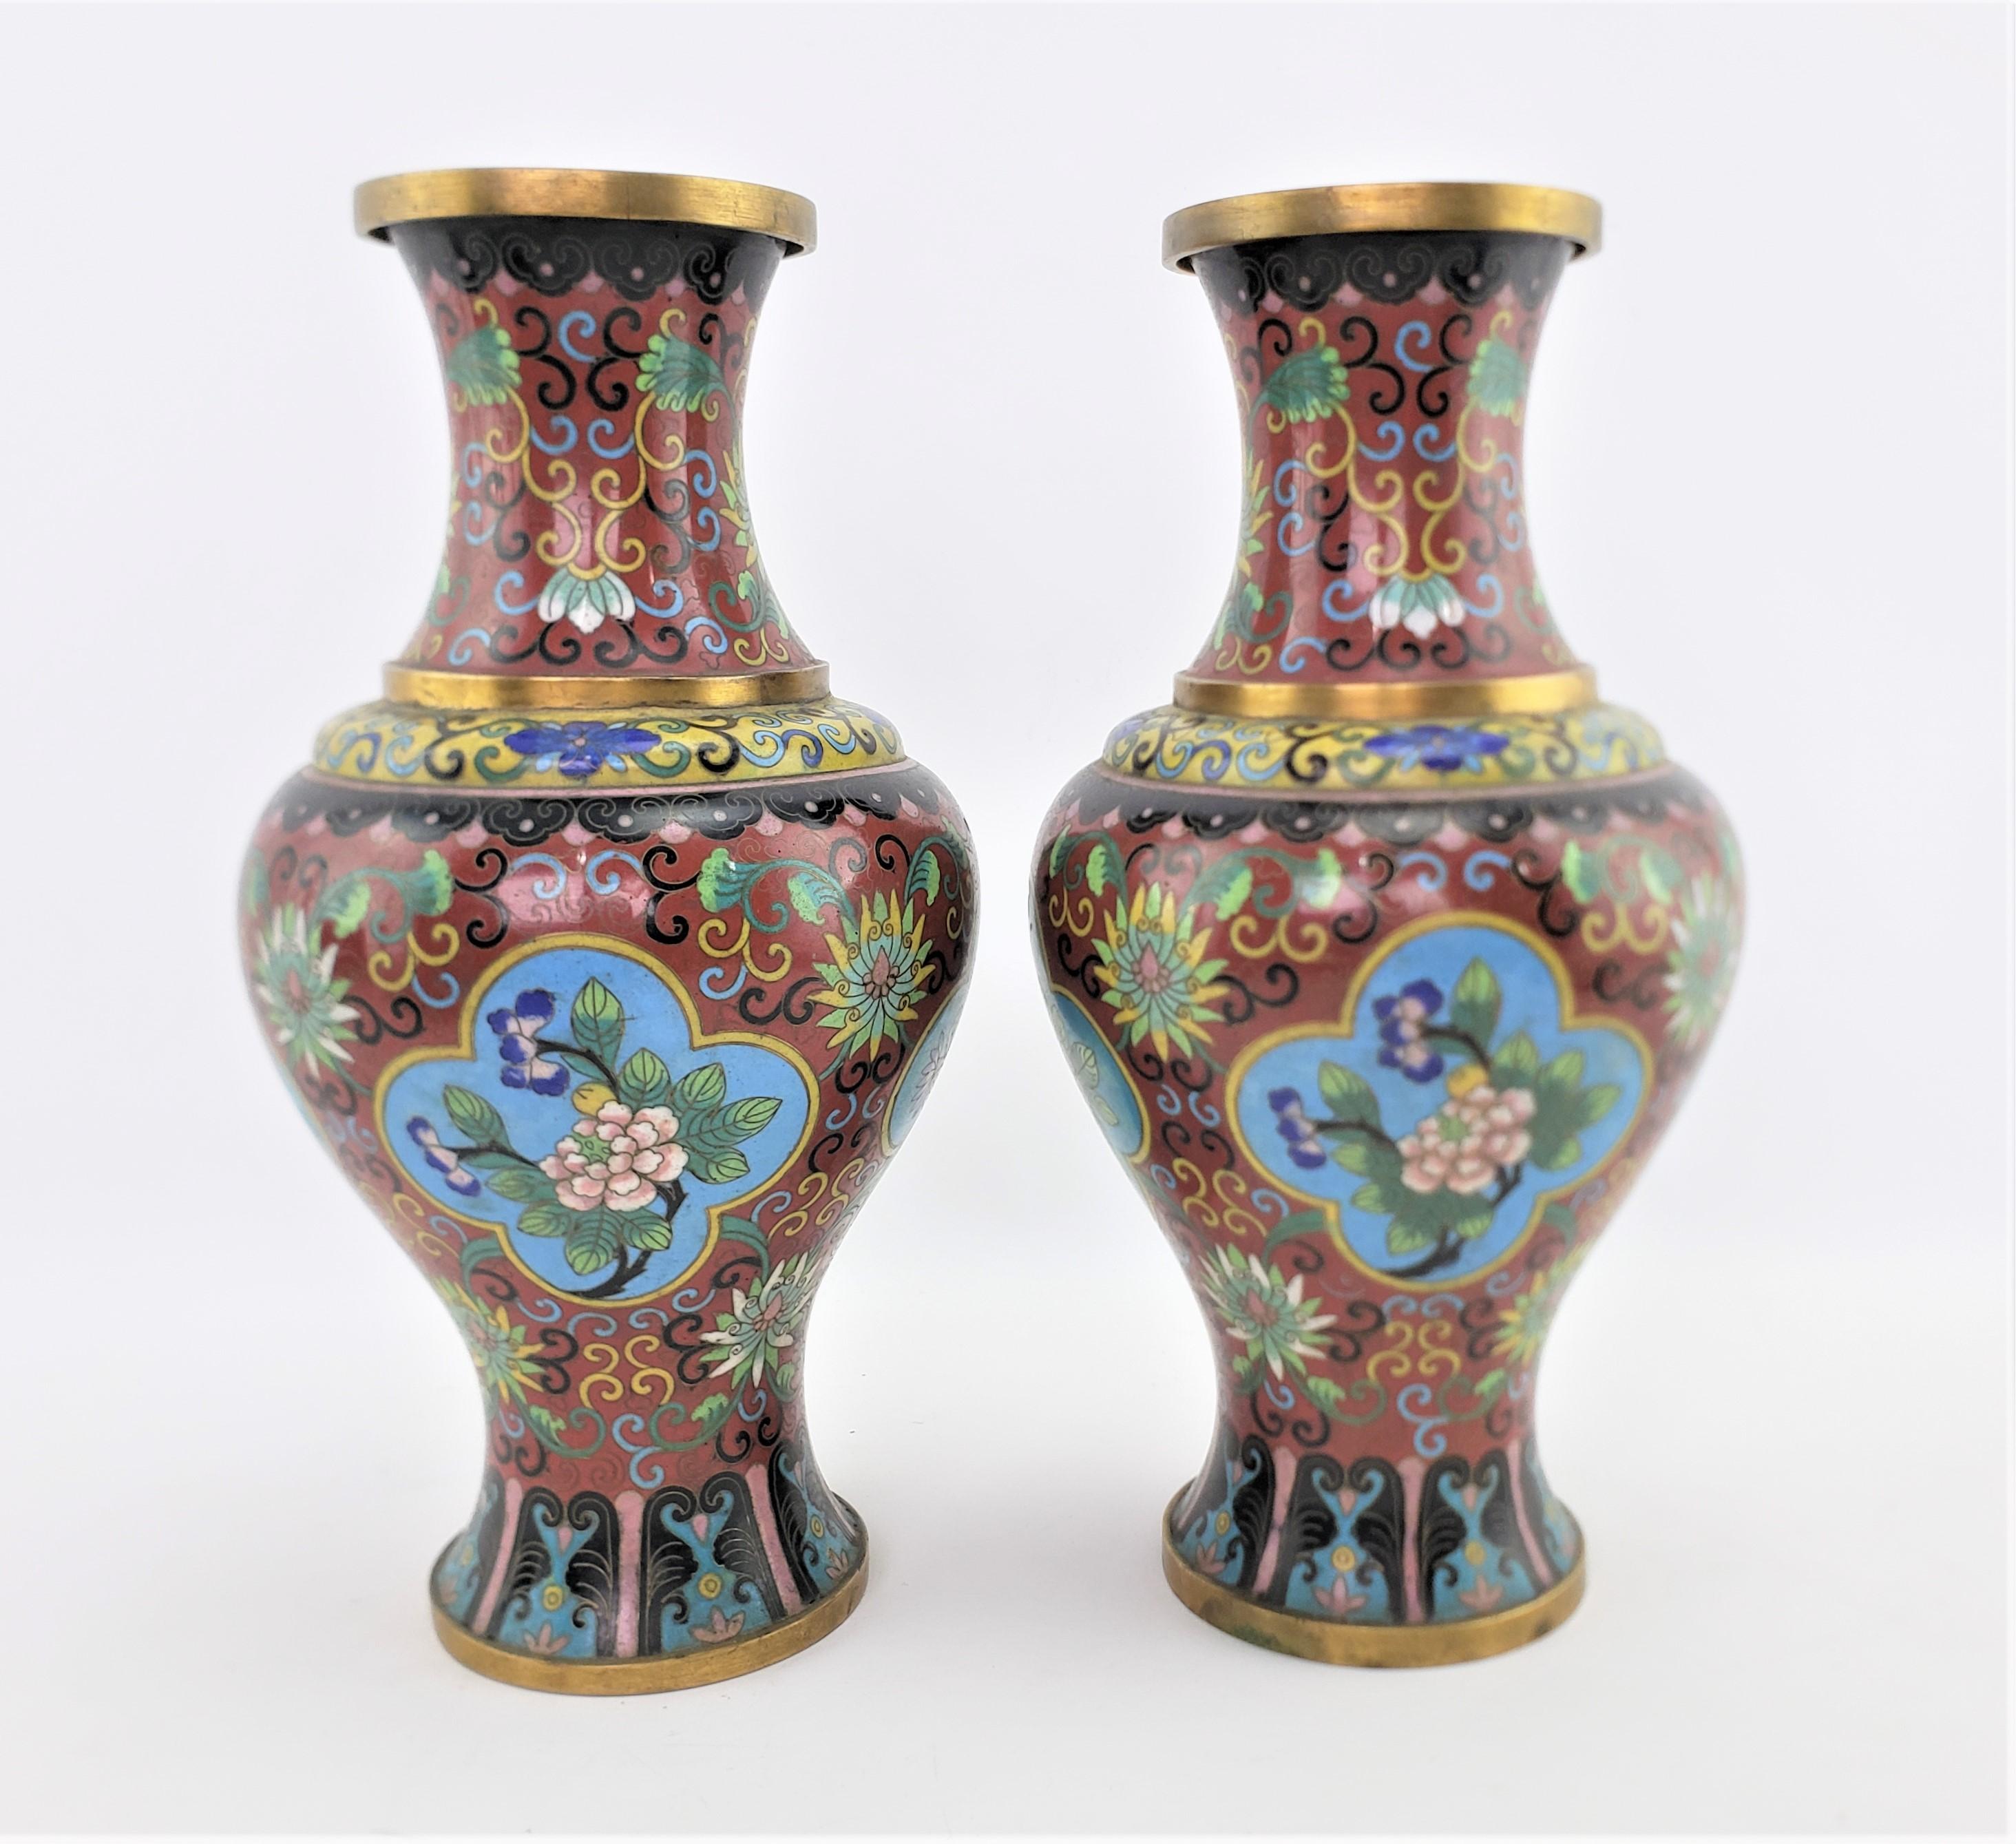 20th Century Pair of Early Chinese Republic Era Cloisonne Vases with Stylized Floral Motif For Sale